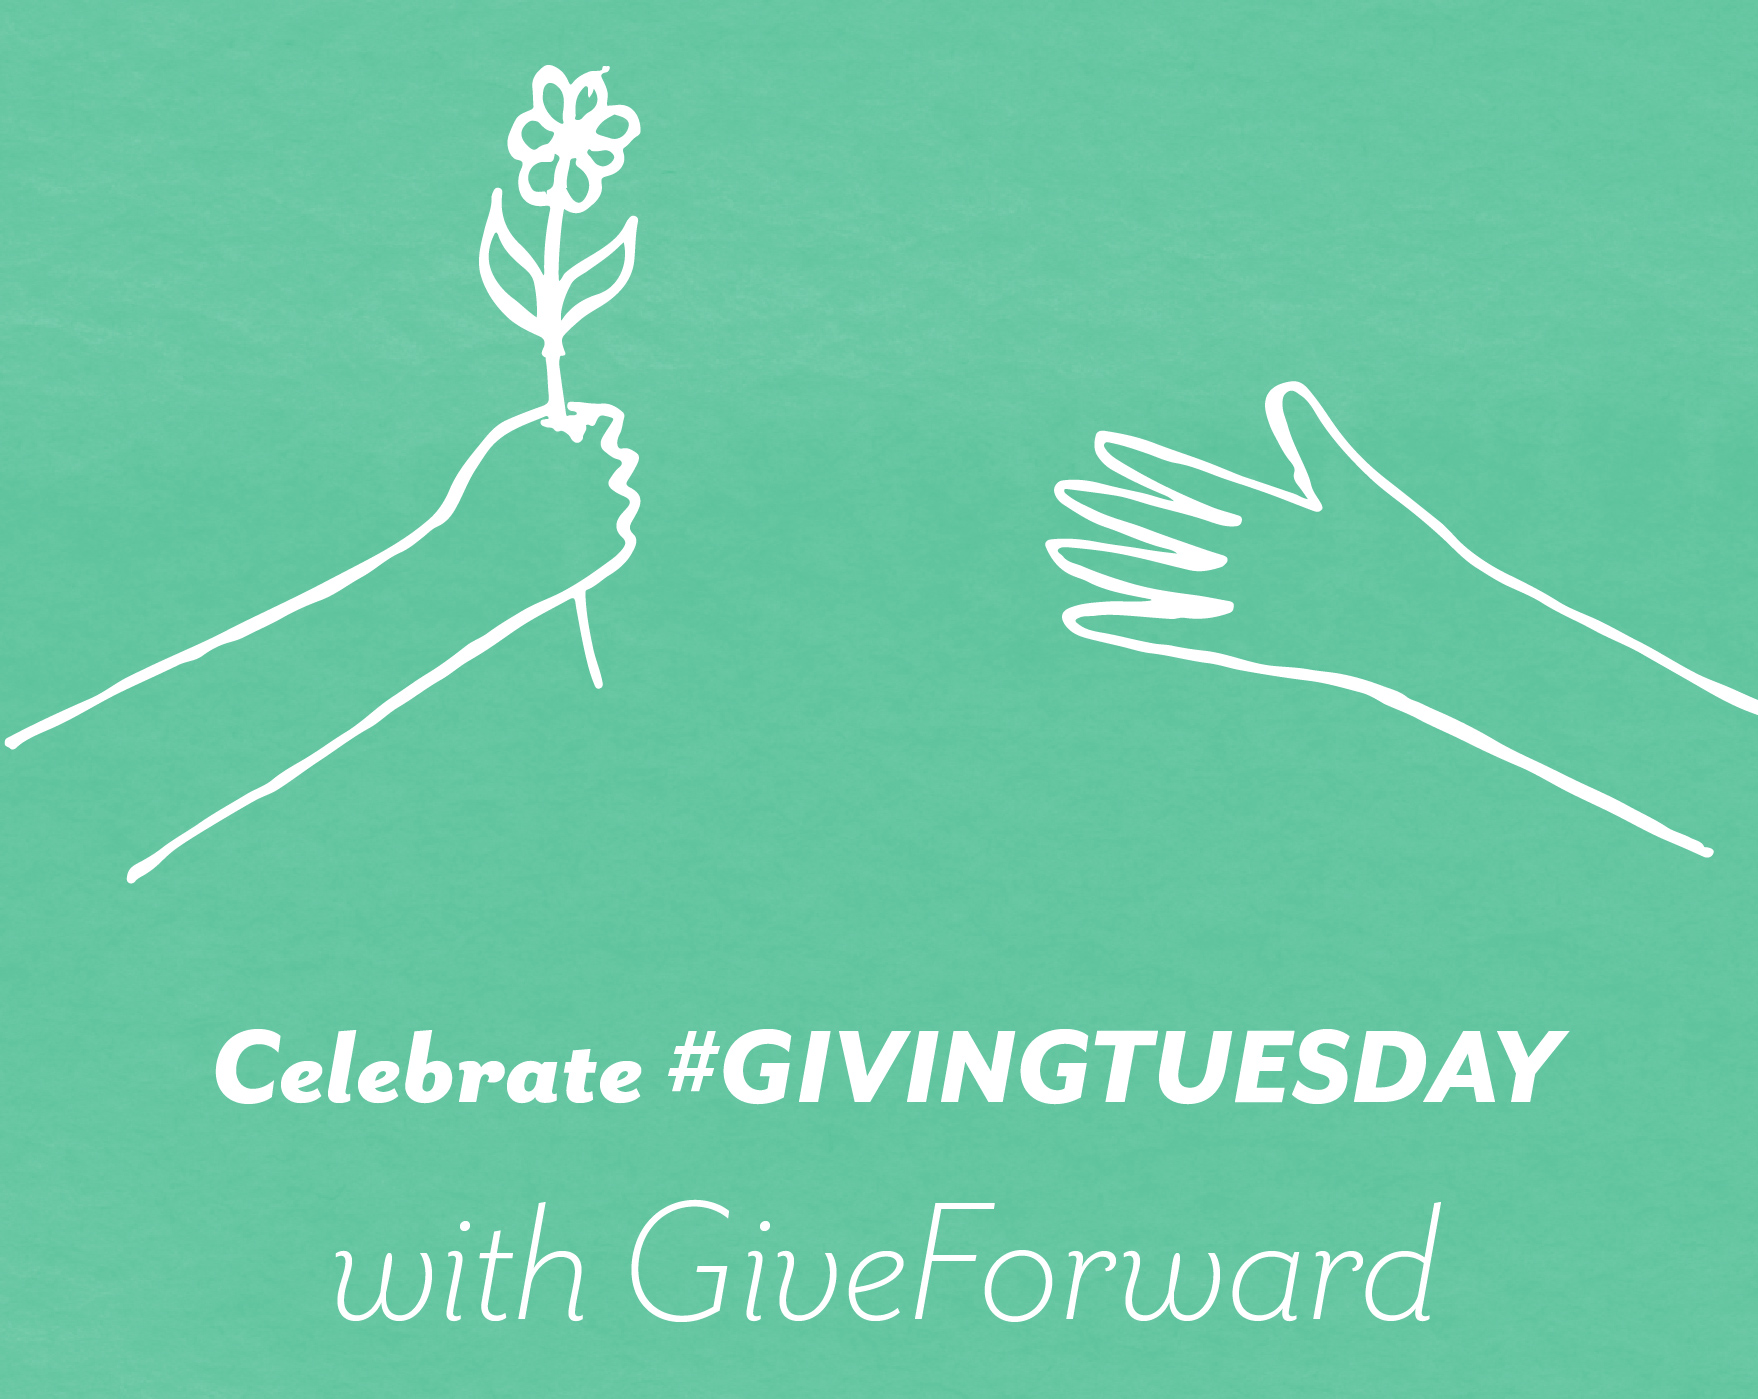 giving tuesday, give forward, movements, donation, pay it forward, holiday giving, holidays, fundraisers, fundraising